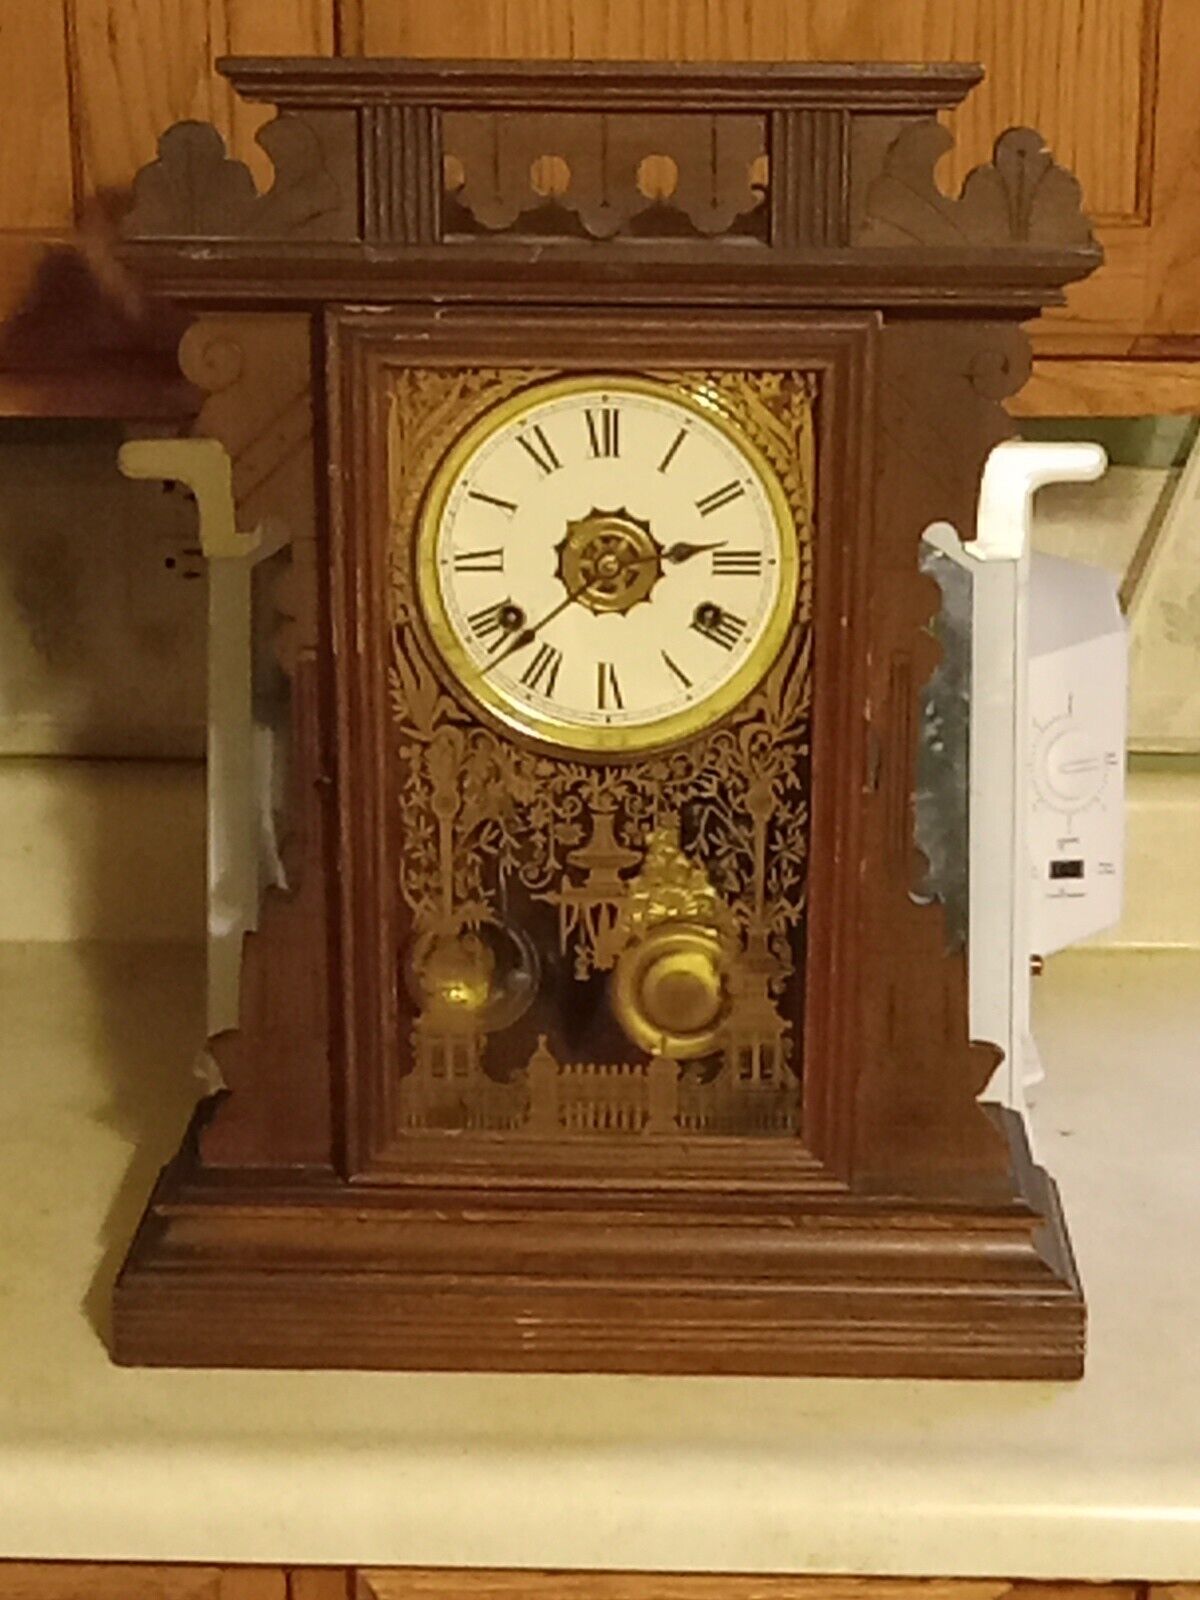 AMERICAN WRINGER CO. ECLIPSE KITCHEN CLOCK WITH ALARM/ KEY RUNNING CIRCA 1900s